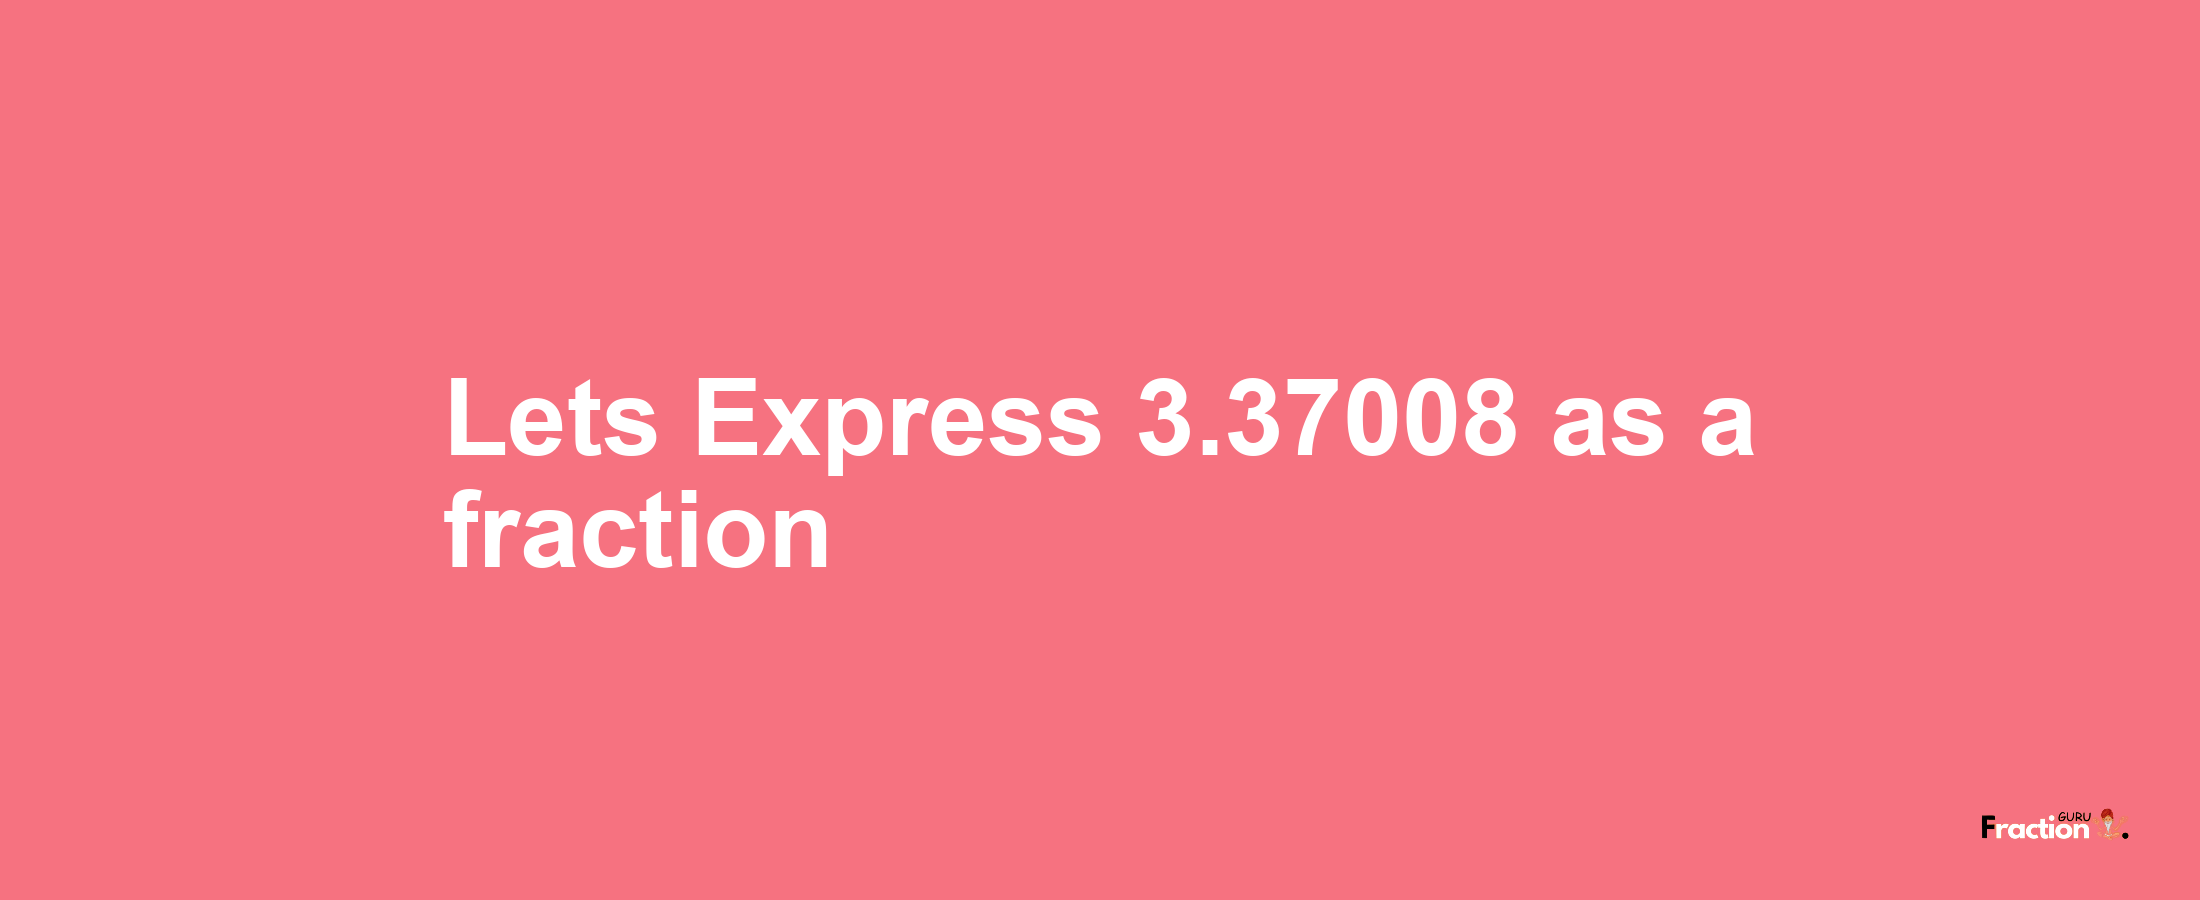 Lets Express 3.37008 as afraction